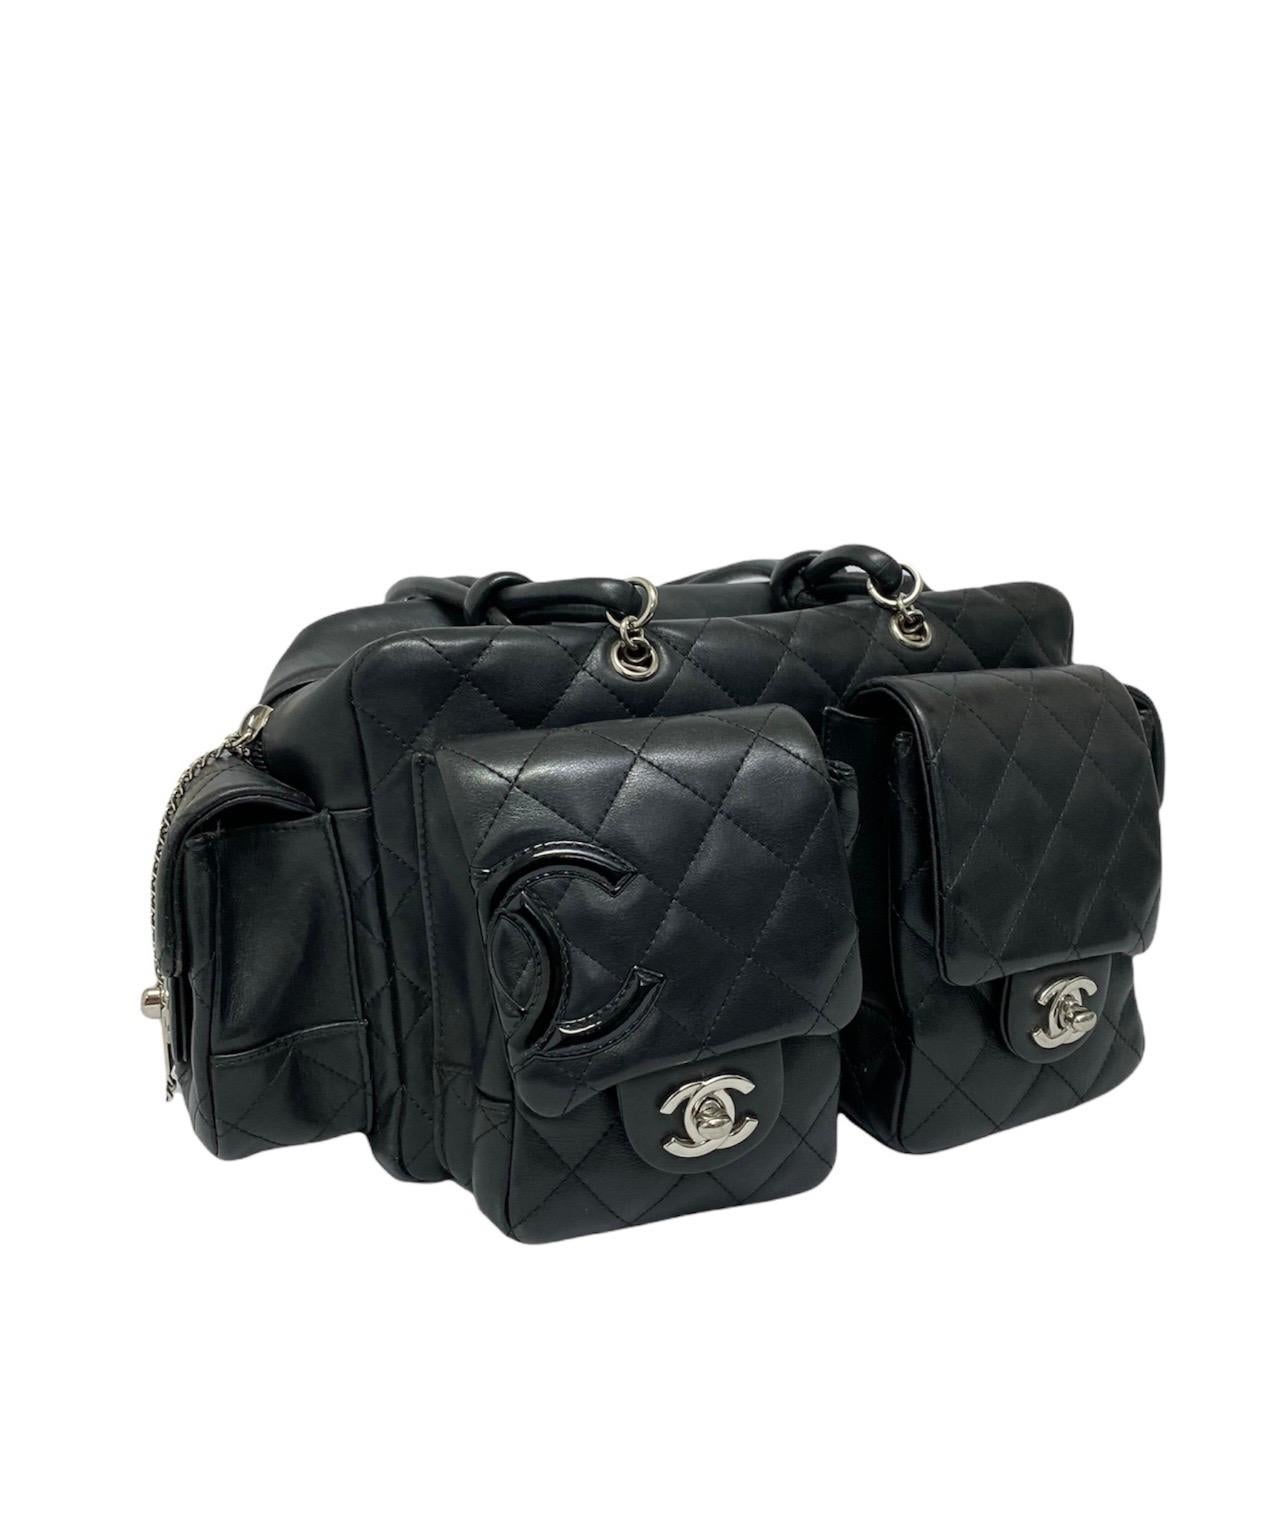 Chanel Cambon Reporter model bag in black quilted calfskin and with silver hardware.  It has a central opening with zip closure, and the interiors are lined with a fuchsia fabric and also has internal pockets.  The bag has five external pockets,